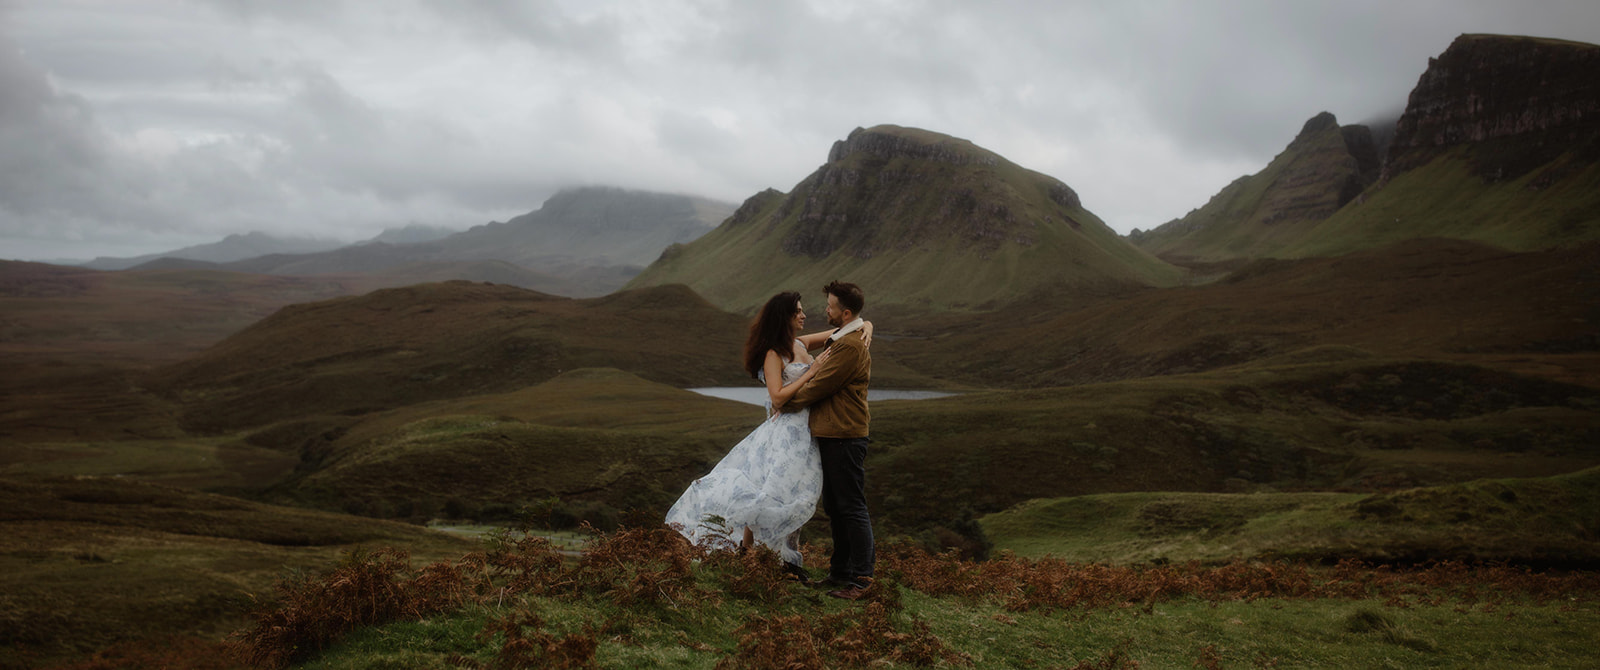 Alex and Elliot shared a romantic moment during their Isle of Skye adventure last September.